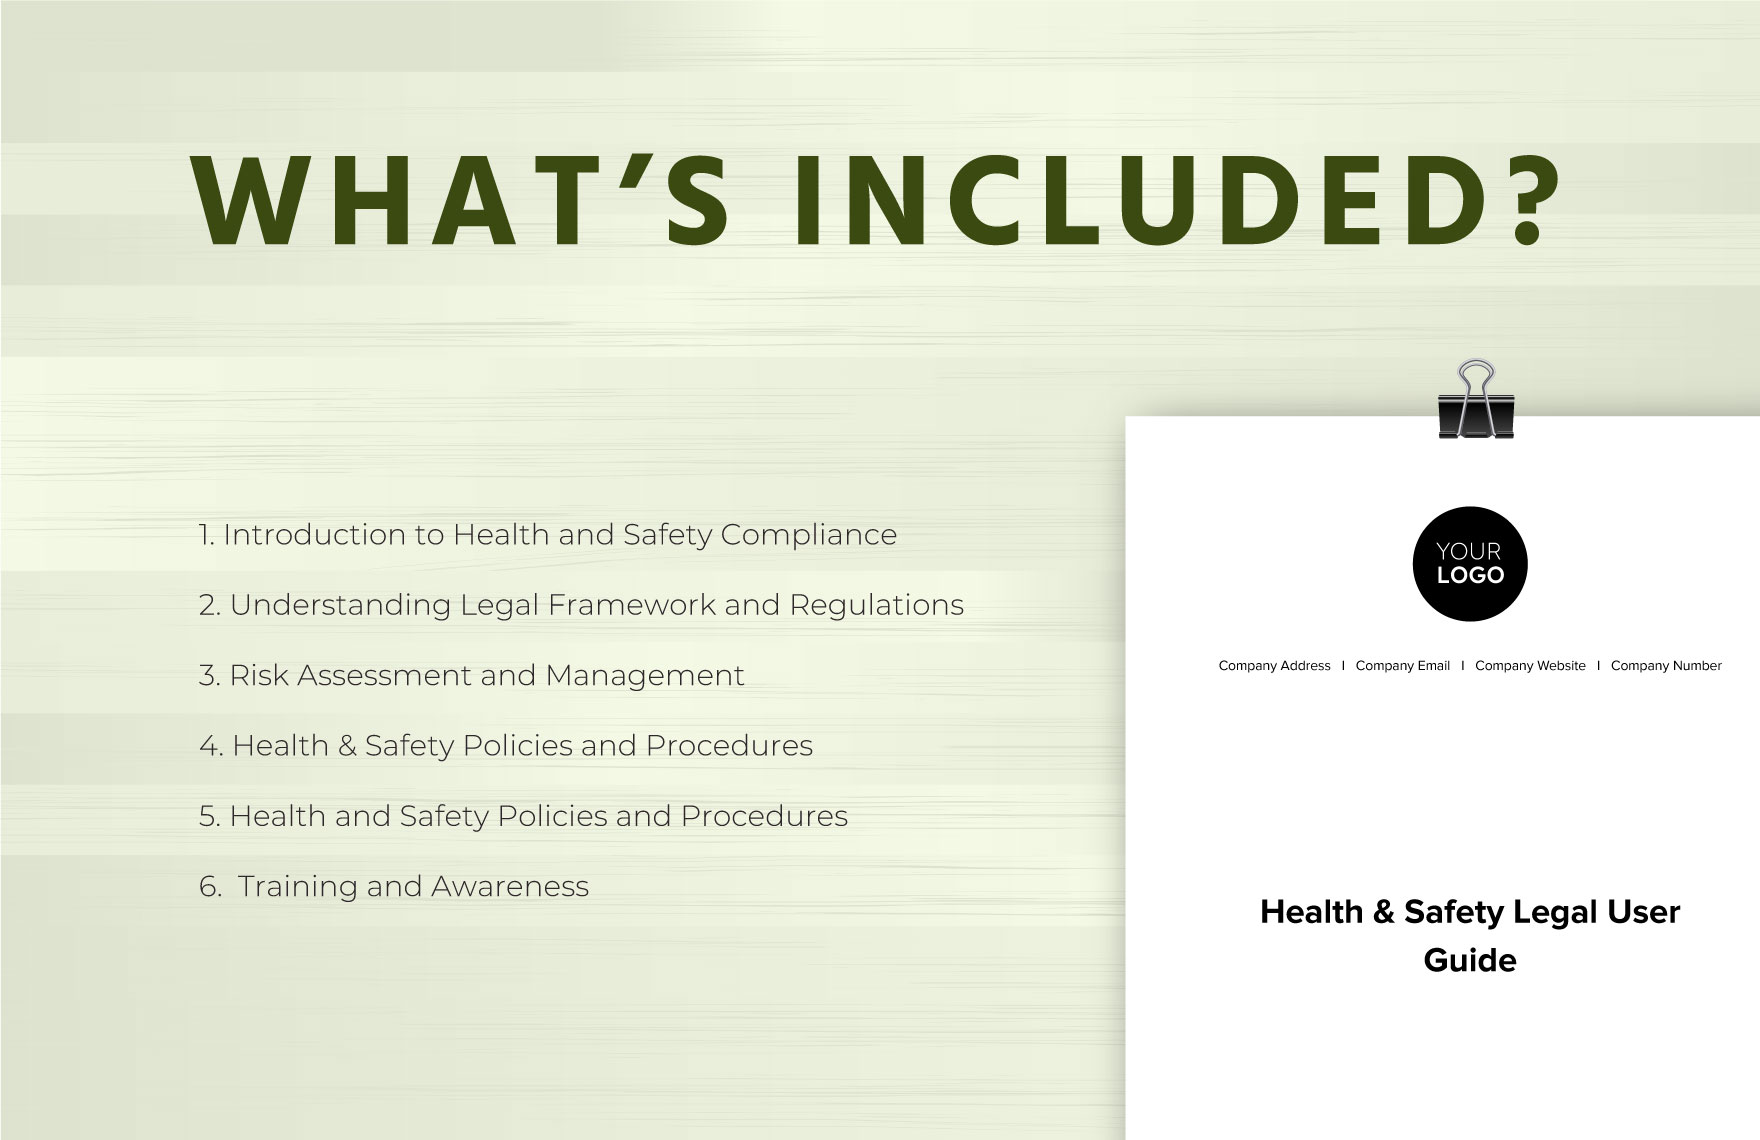 Health & Safety Legal User Guide Template